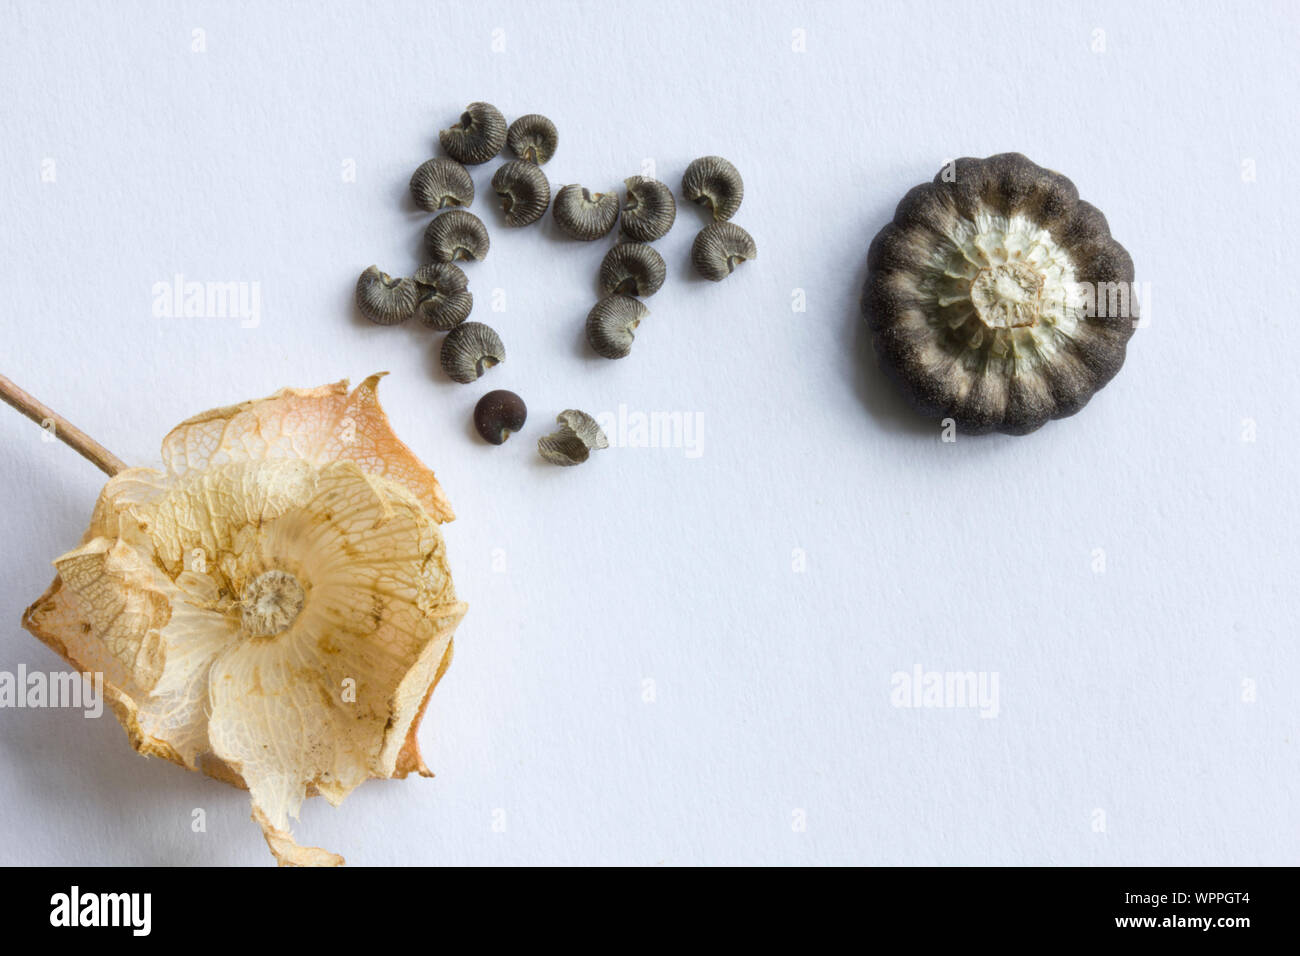 Lavatera. Seed pods. Stock Photo